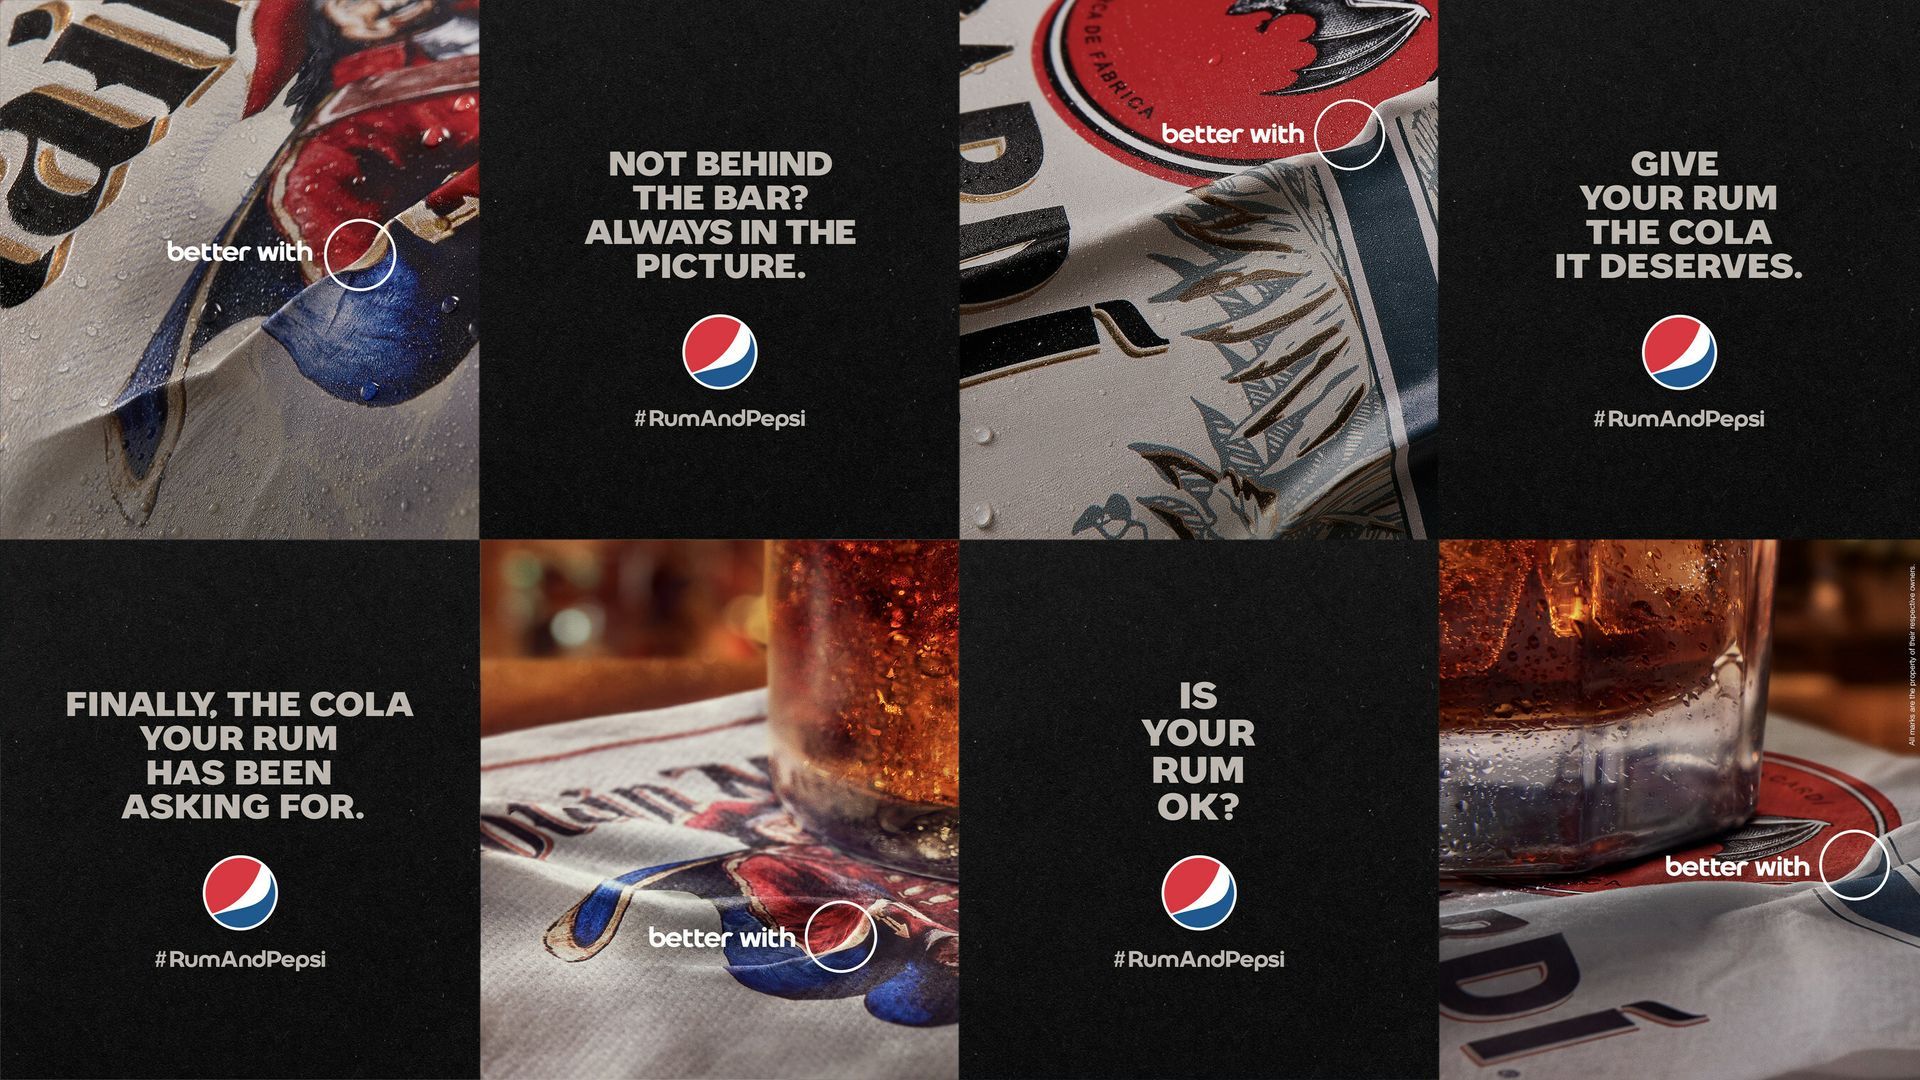 Pepsi_2023_Rum-and-Pepsi_Pepsi-Proves-That-One-of-the-Most-Popular-Bar-Calls-Has-Gotten-It-Wrong